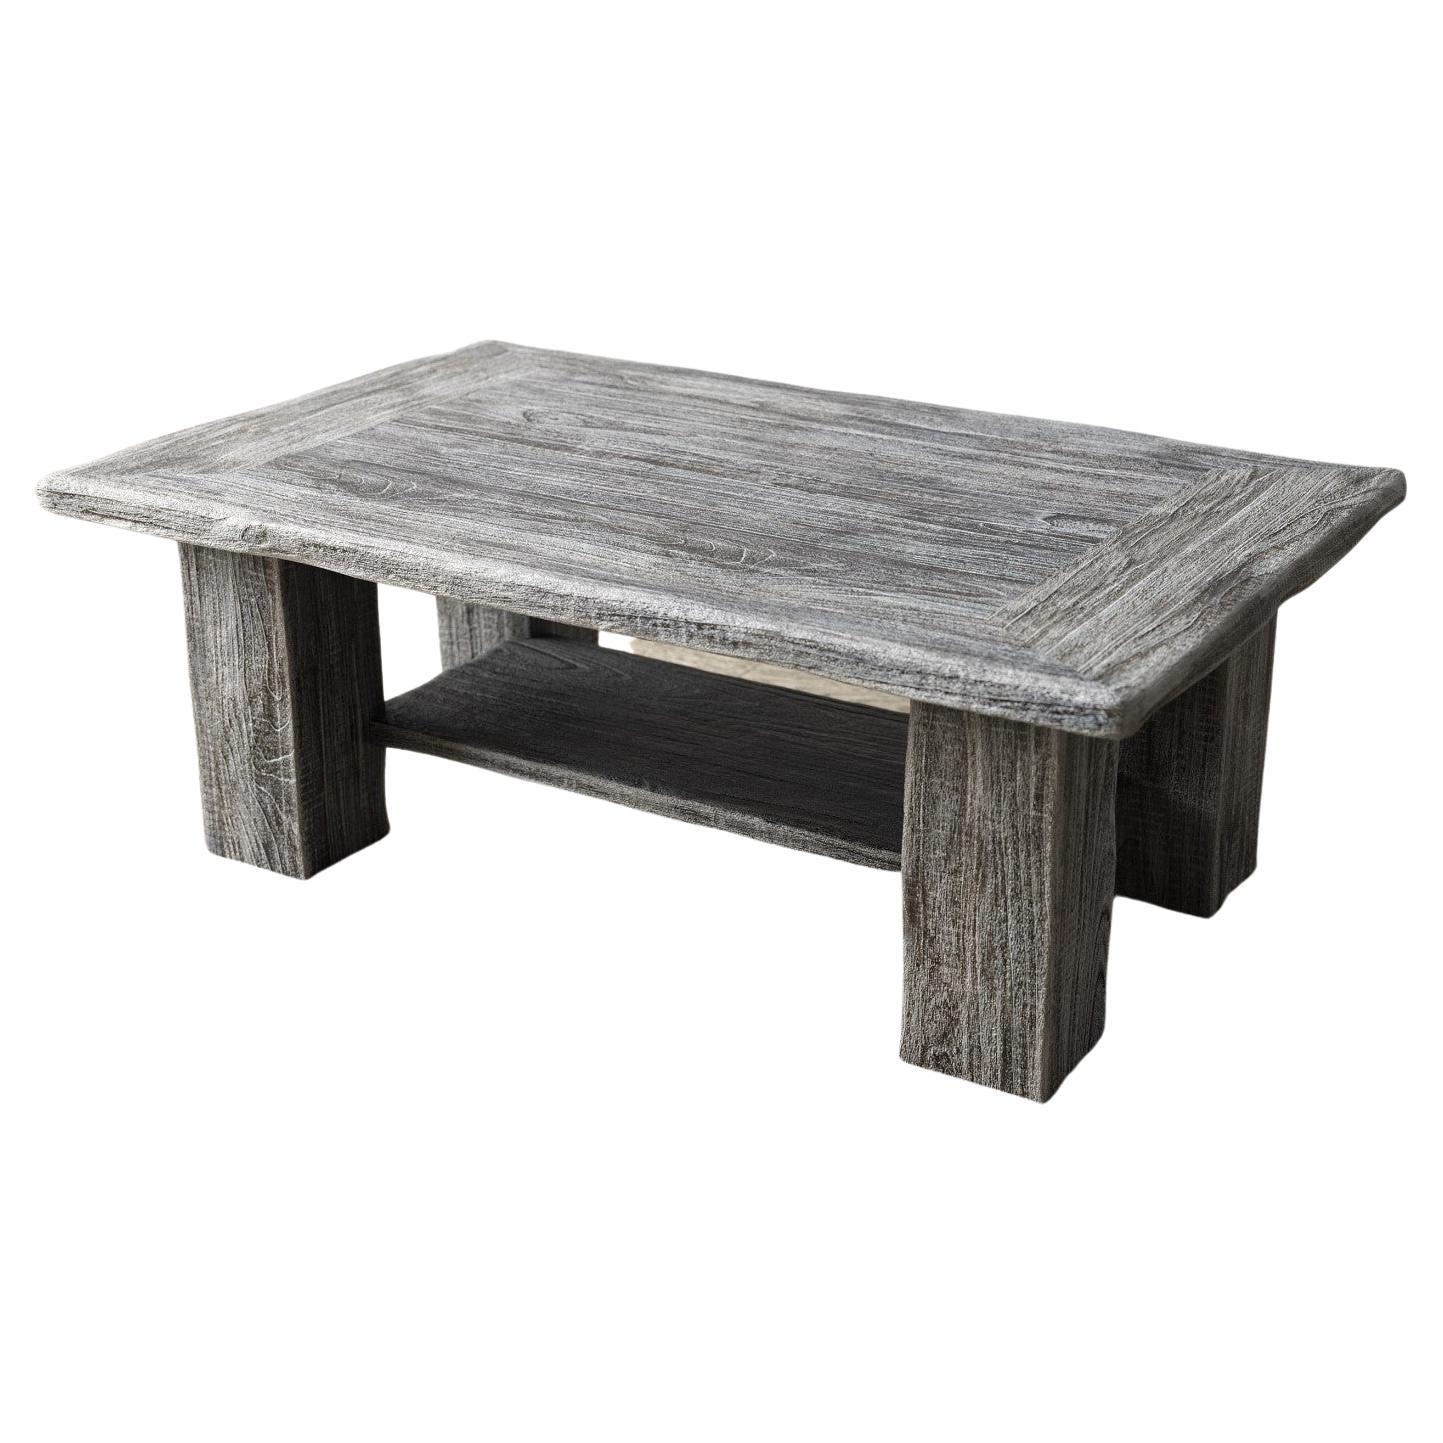 Rustic Teak Coffee Table in Distressed Weathered Gray For Sale